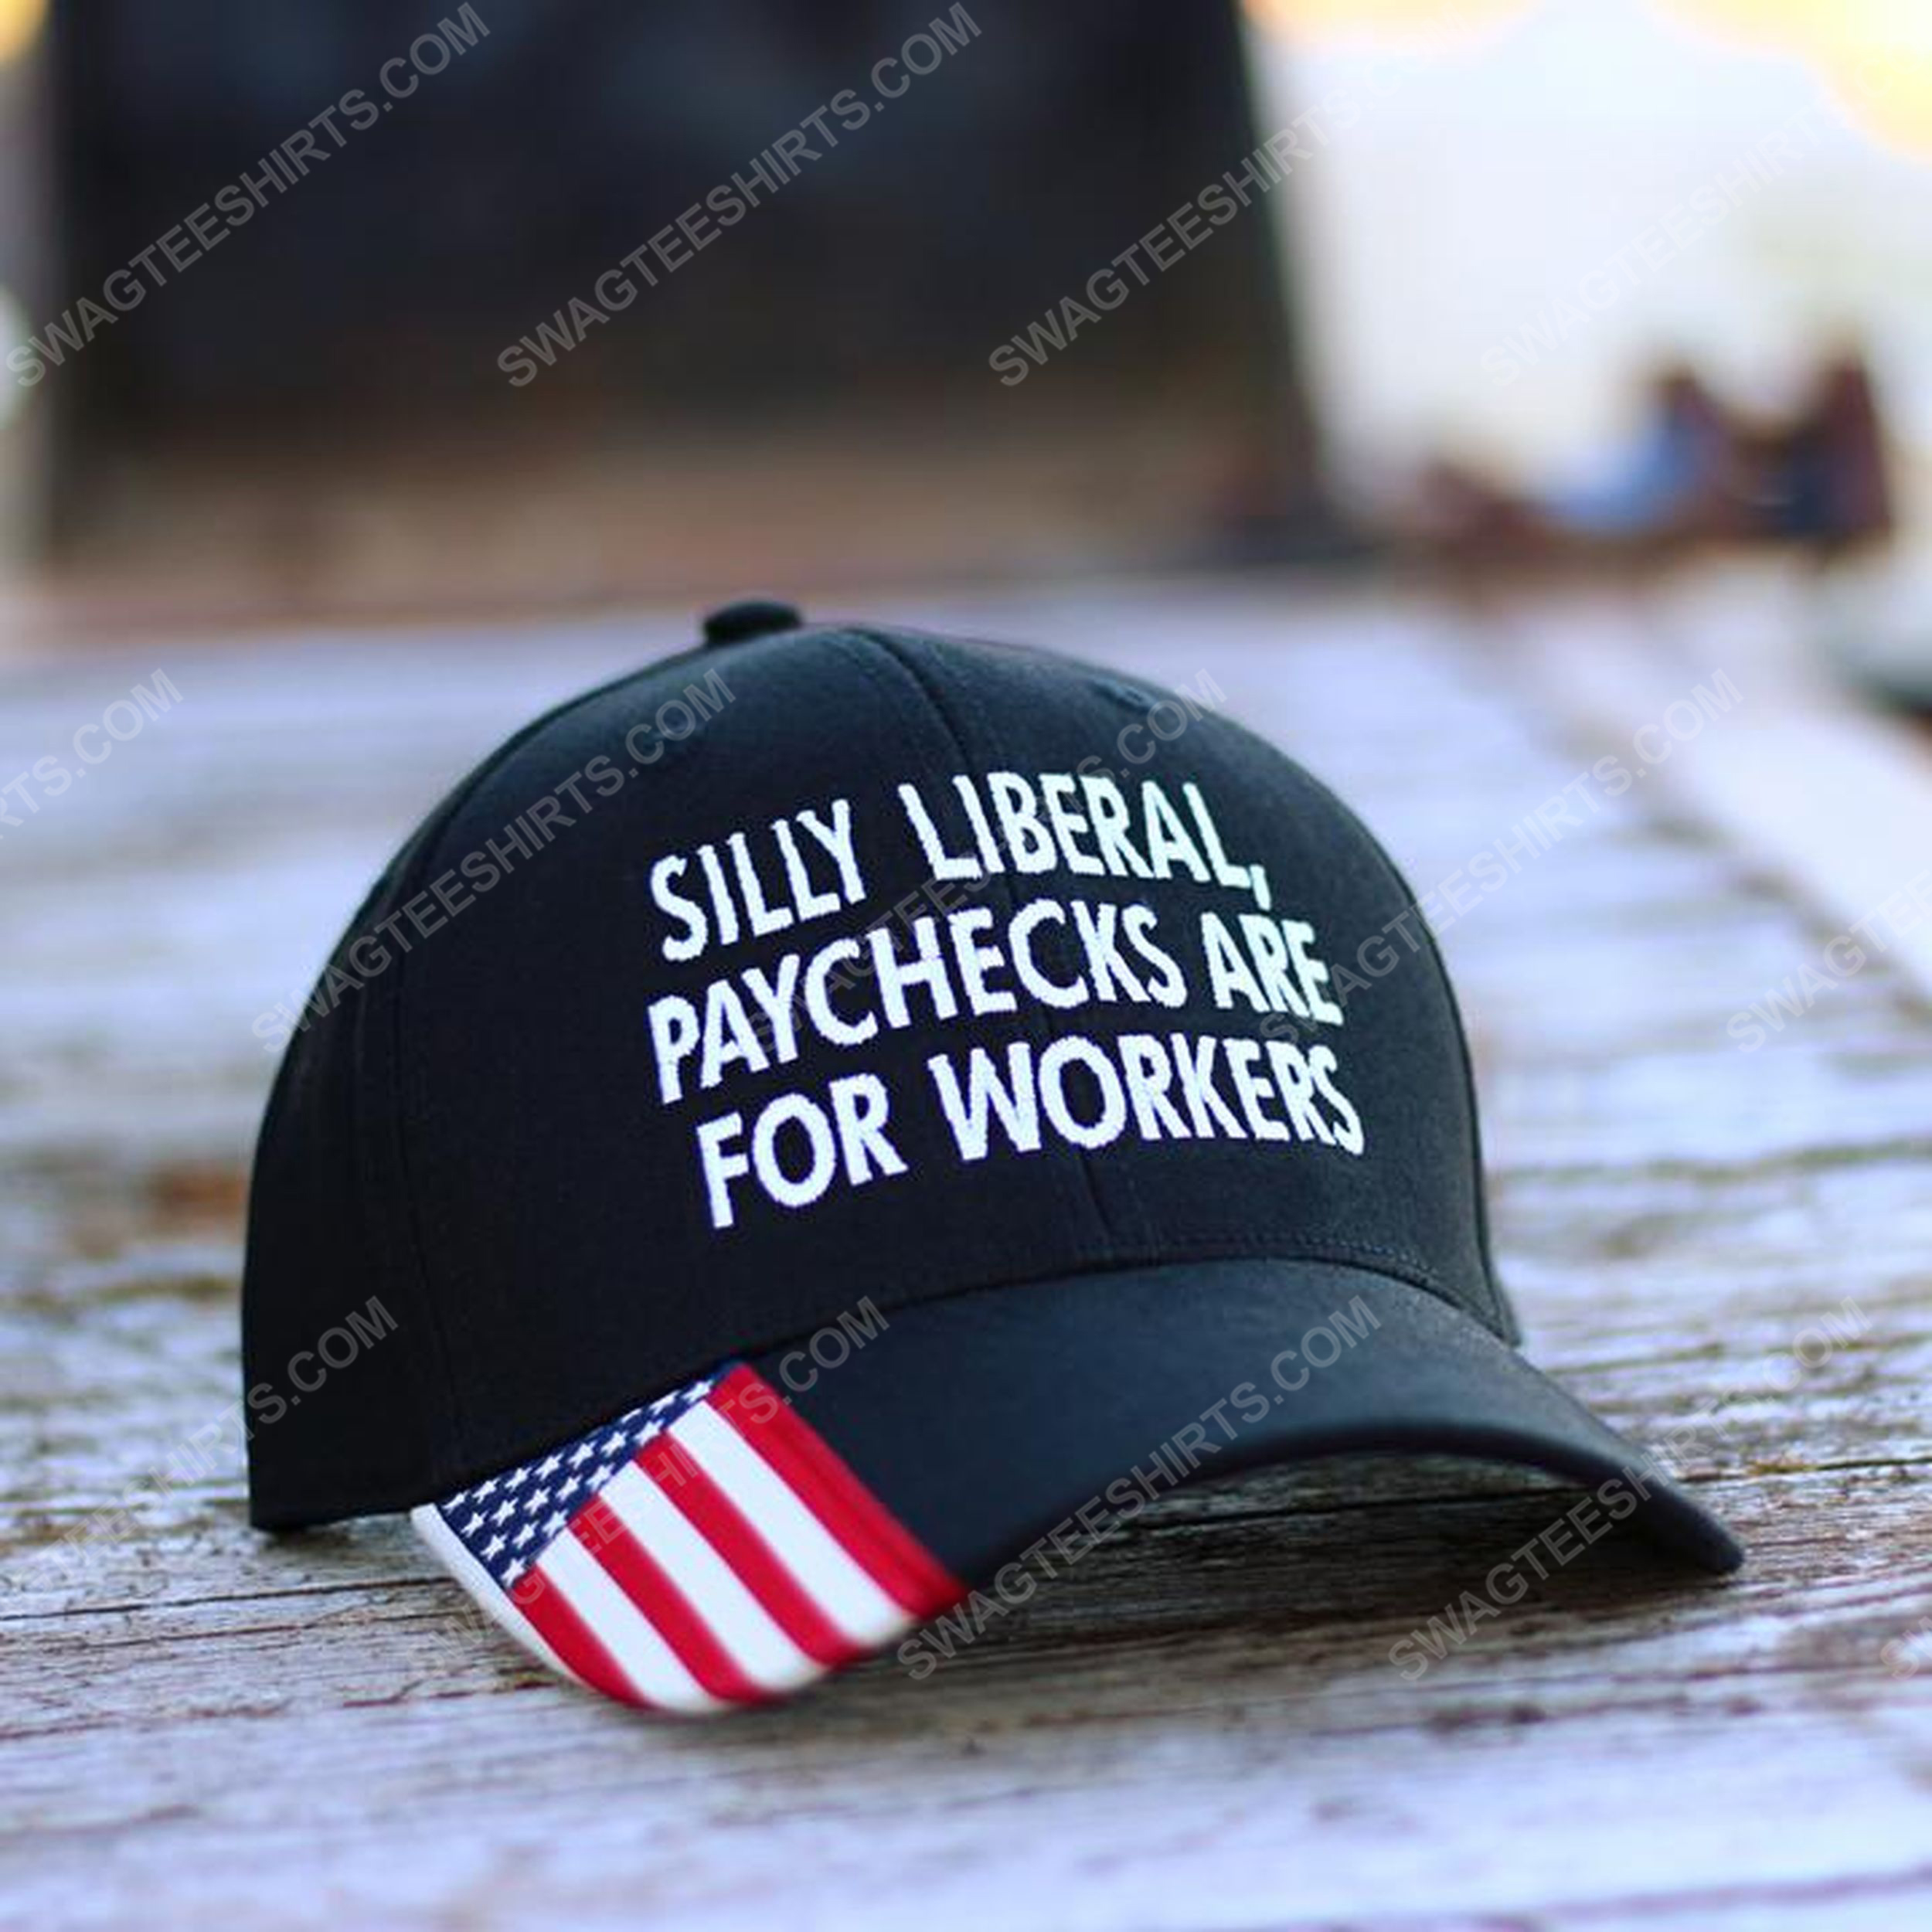 Silly liberal paychecks are for workers full print classic hat 1 - Copy (3)